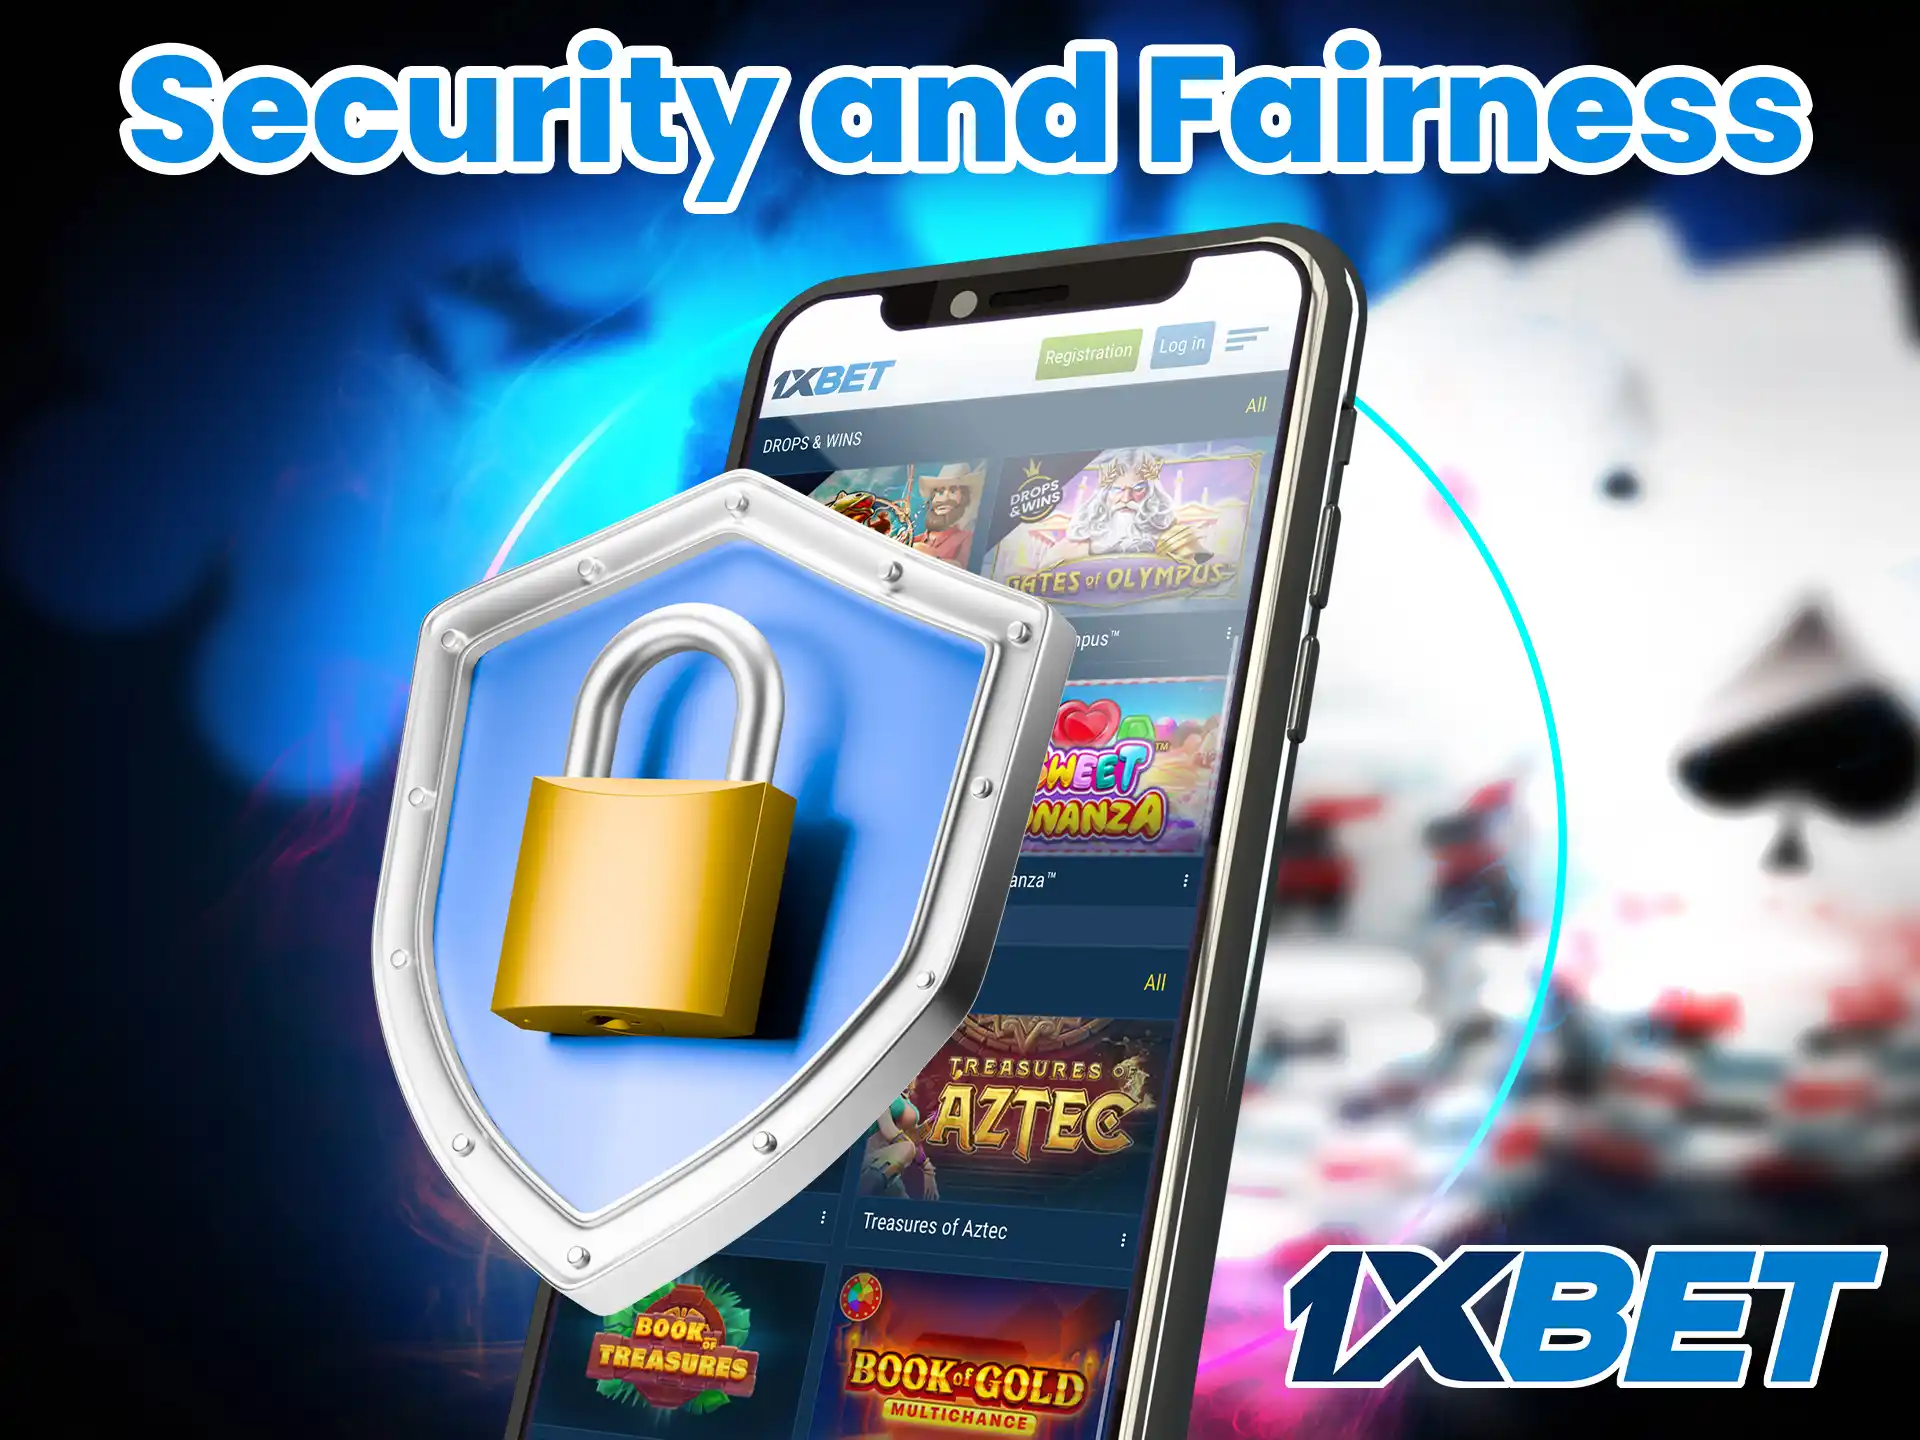 1xbet pays great attention to the security of all secret data.